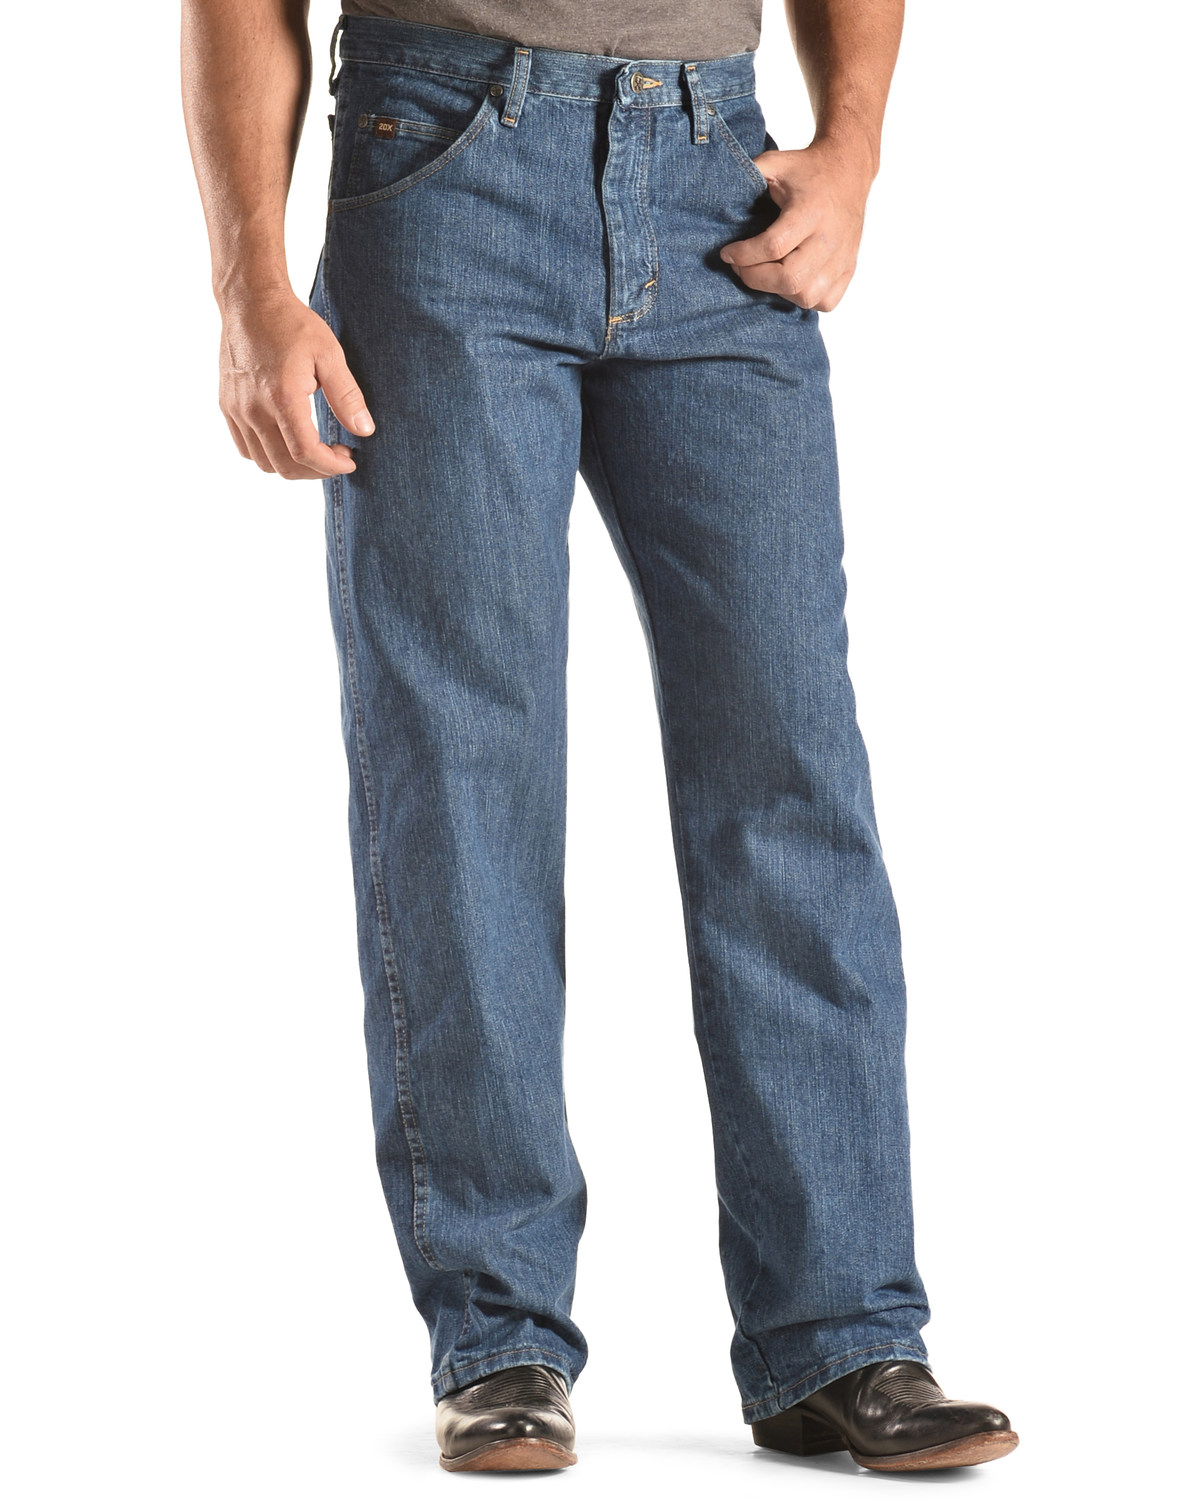 Wrangler 20X Jeans - No. 23 Relaxed Fit | Boot Barn